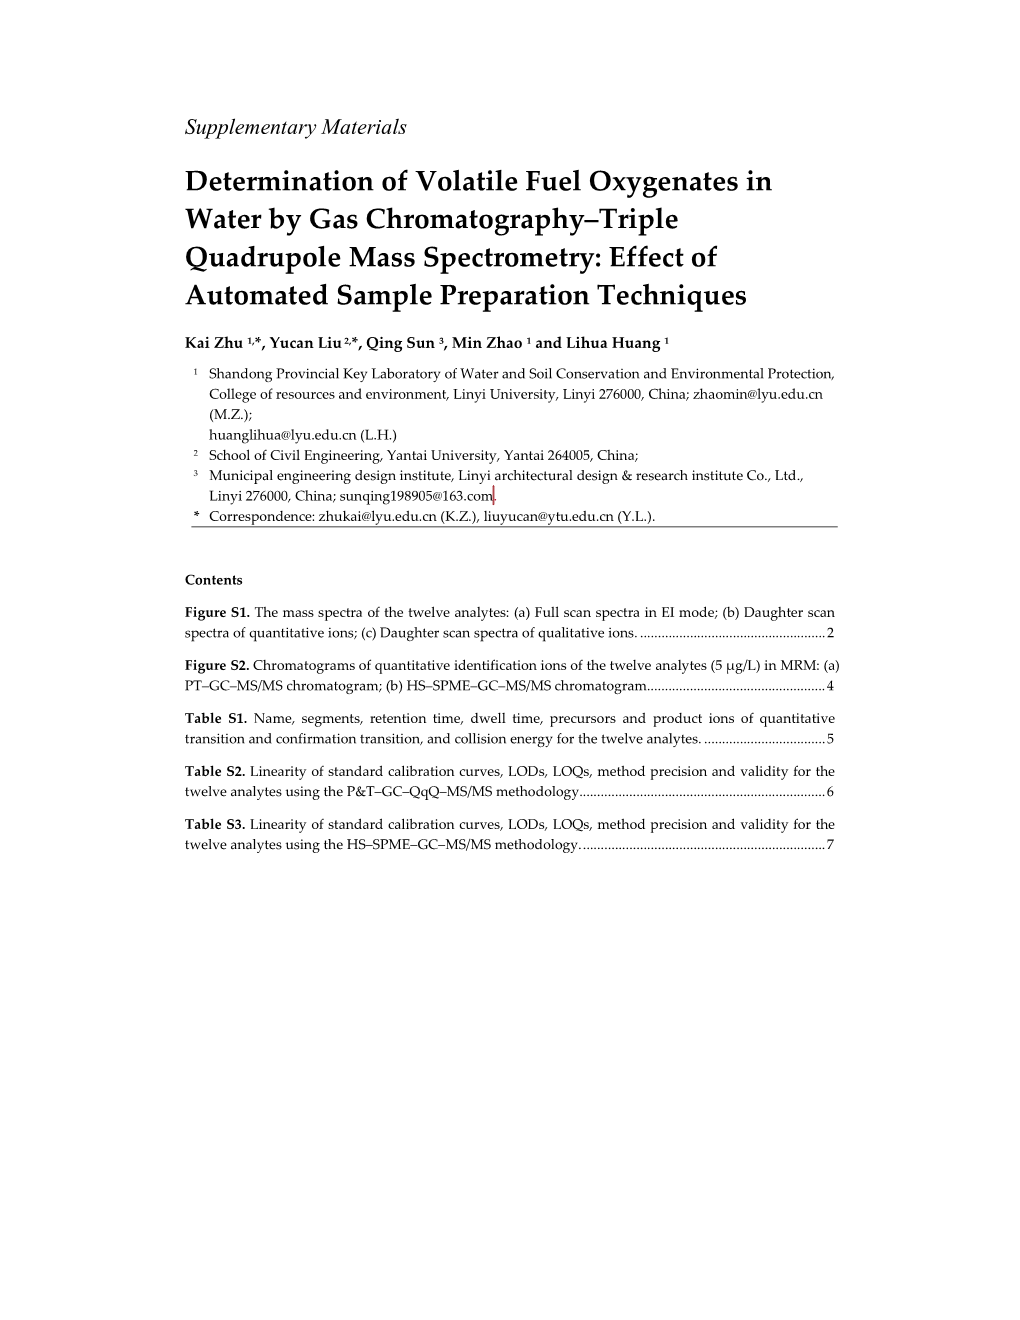 Determination of Volatile Fuel Oxygenates in Water by Gas Chromatography–Triple Quadrupole Mass Spectrometry: Effect of Automated Sample Preparation Techniques